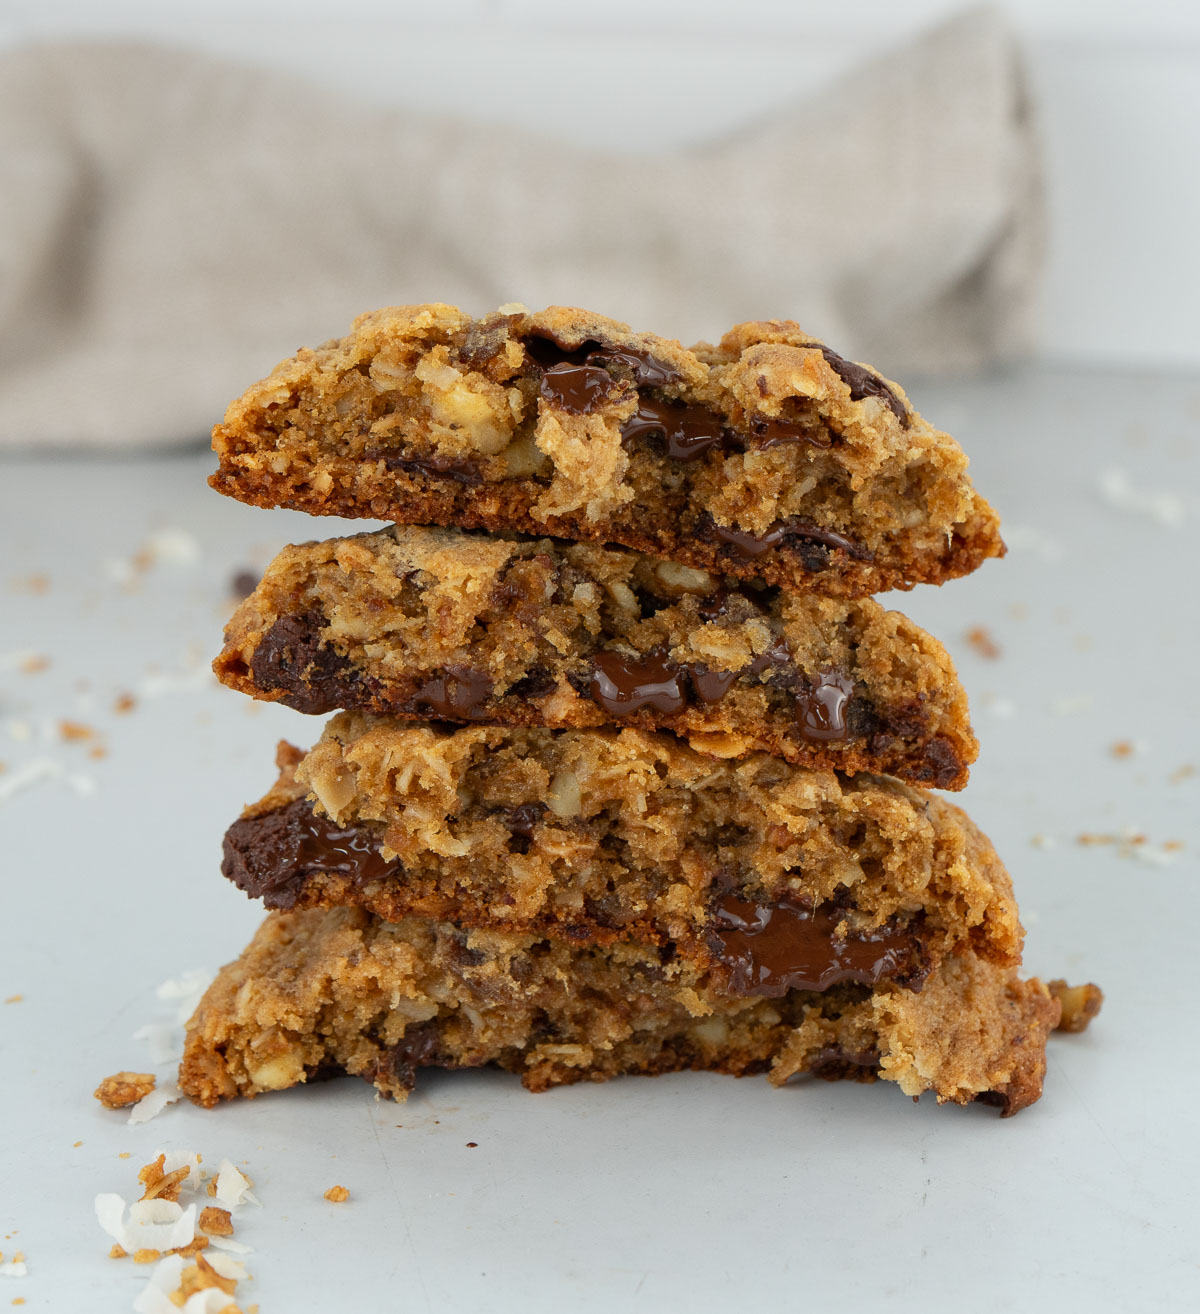 Whole Wheat Granola Date Chocolate Chip Cookies